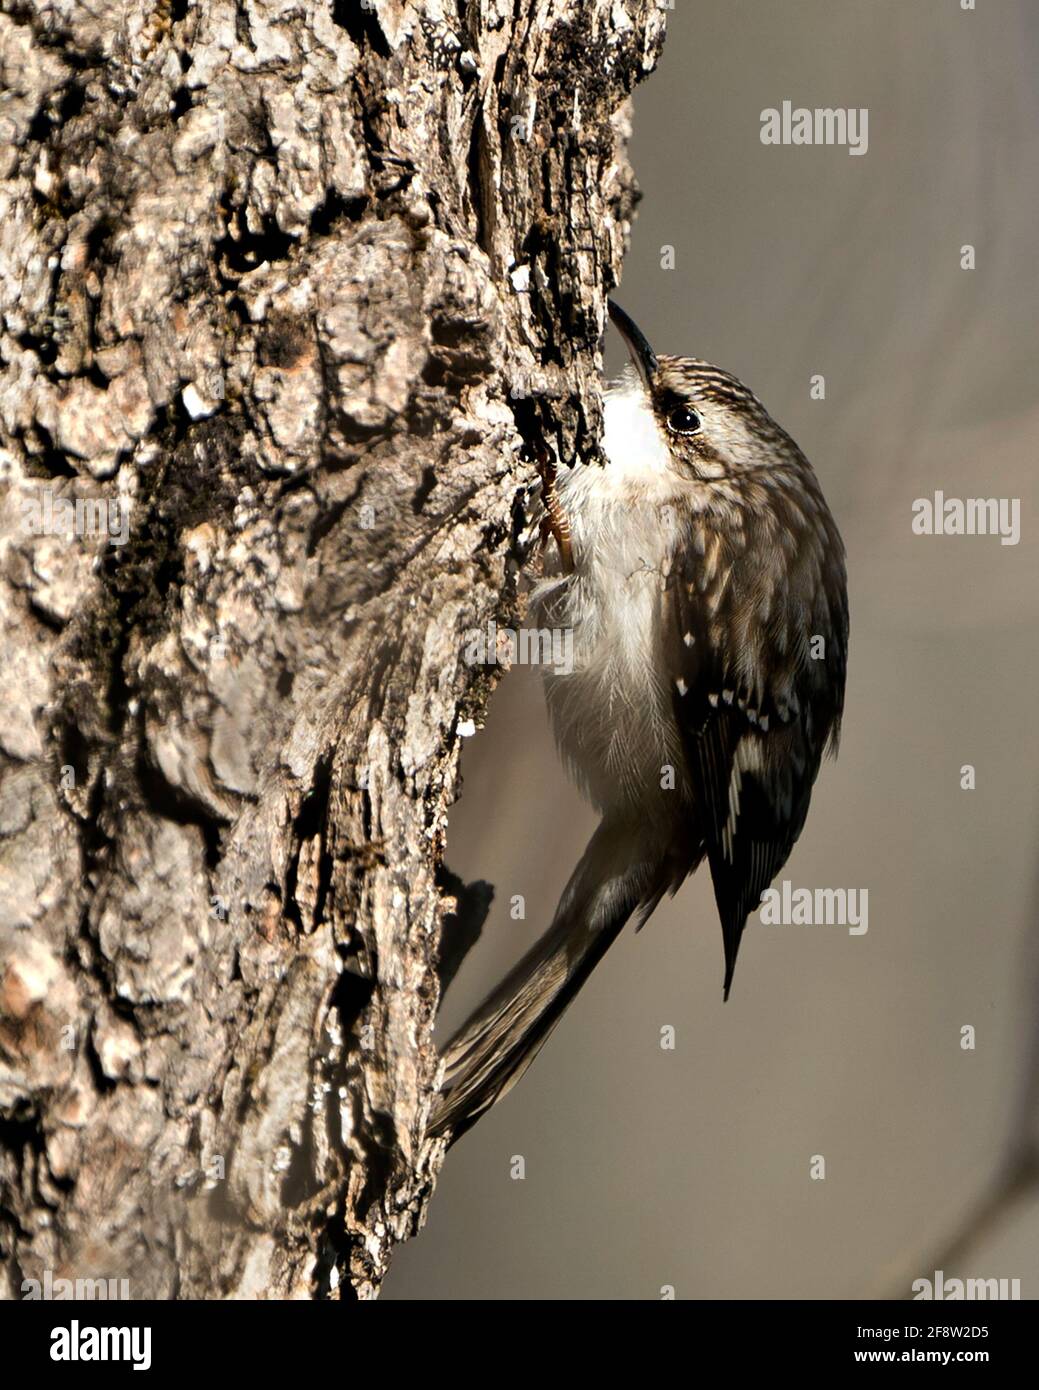 Brown Creeper bird close-up on a tree trunk looking for insect in its environment and habitat and displaying brown feathers, curved claws hook. Stock Photo